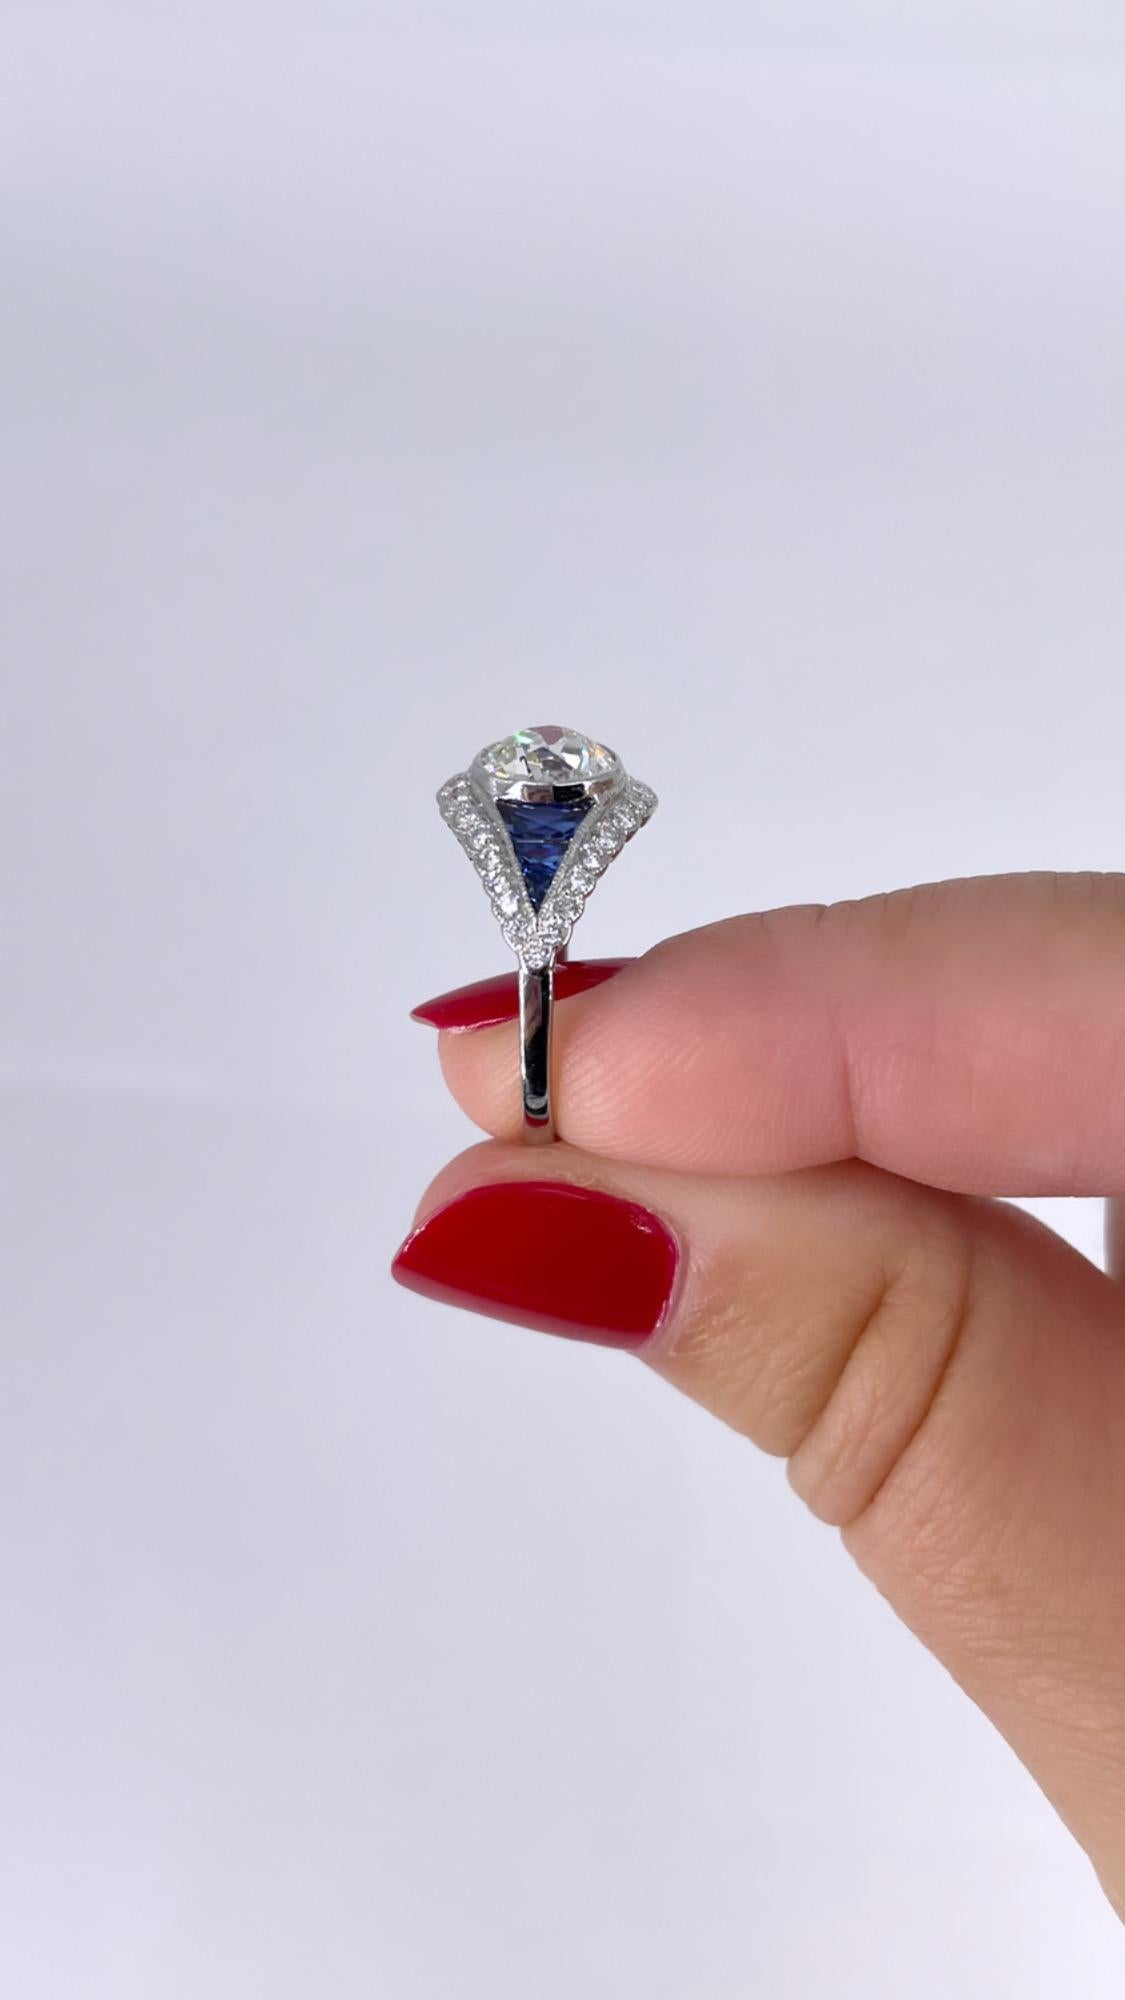 Women's or Men's GIA Certified 1.21 Carat Old European Cut Diamond and Sapphire Ring For Sale